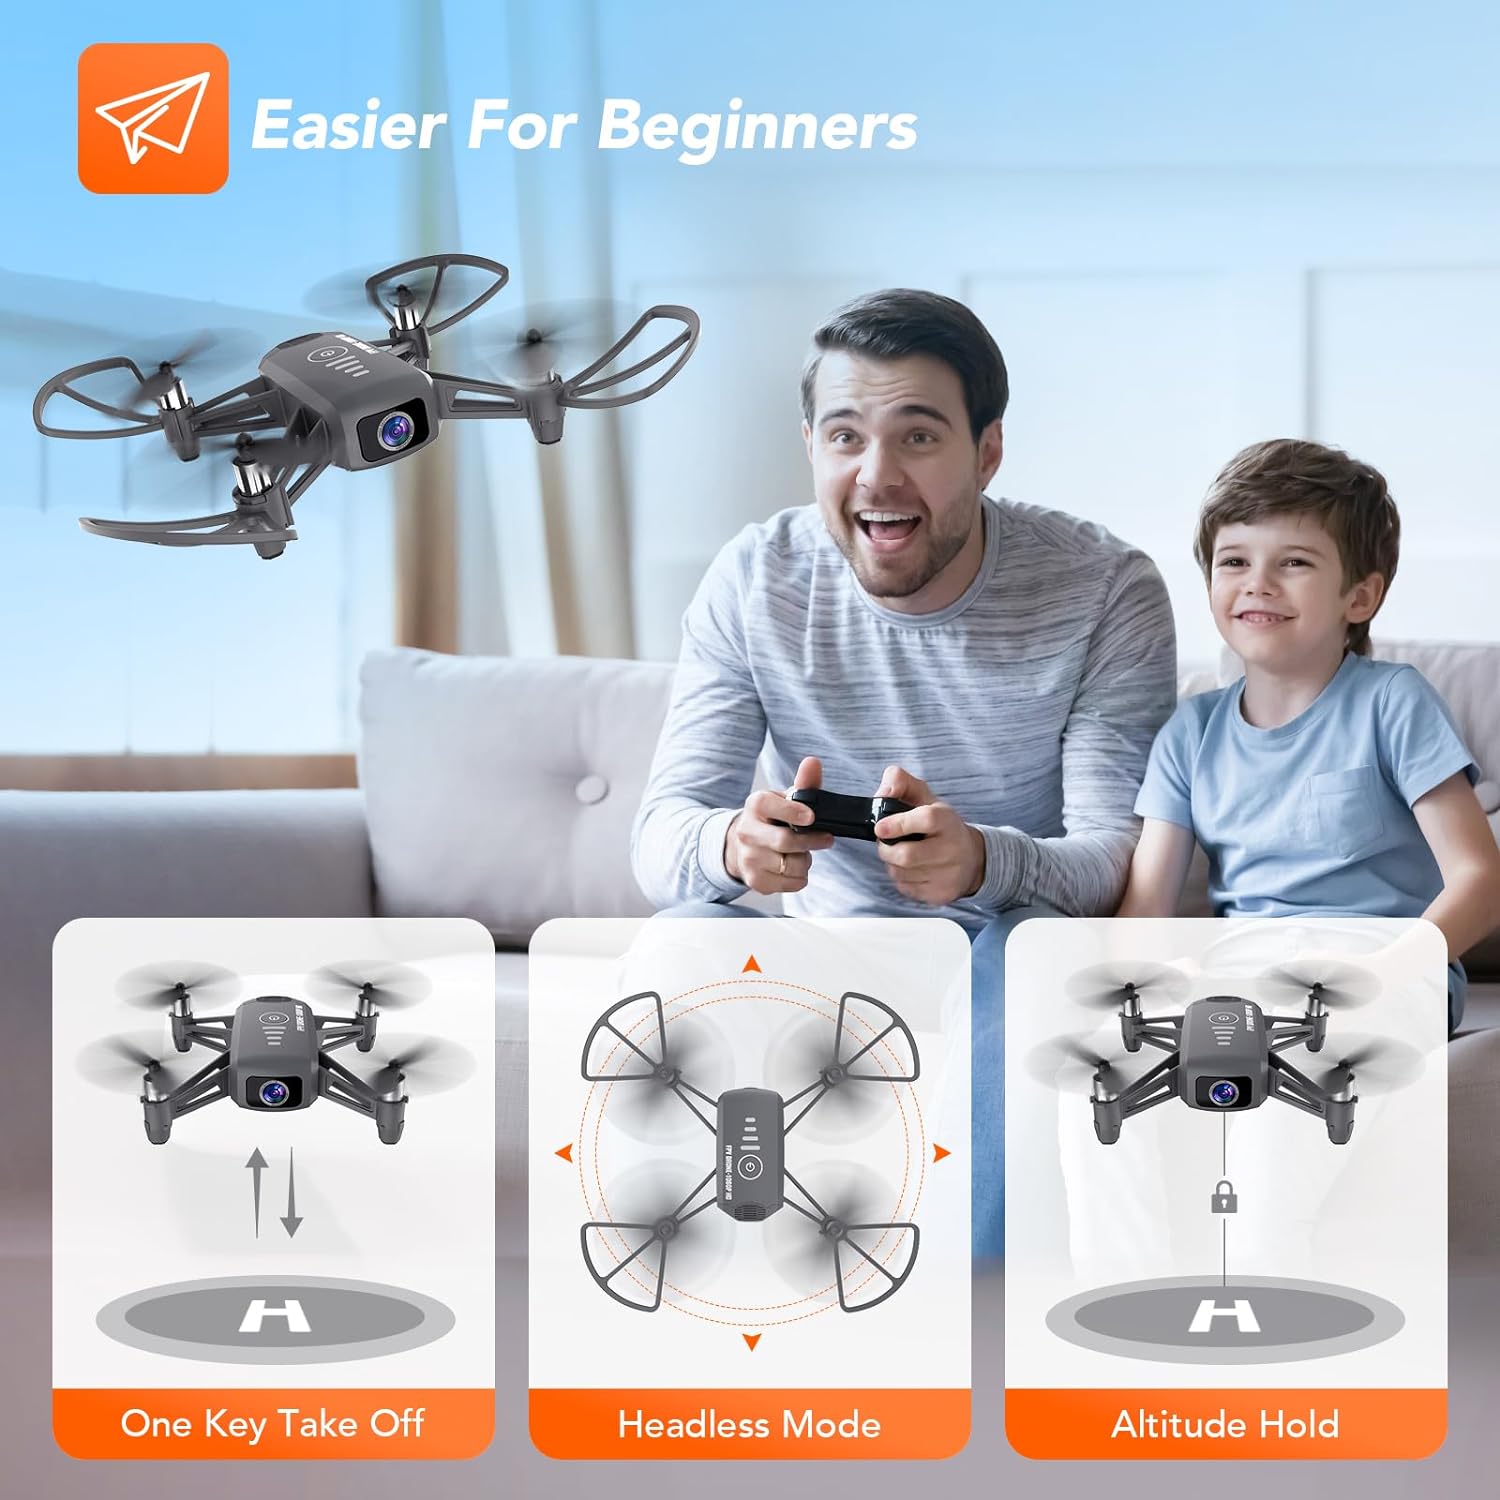 Elukiko H818 - Easy To Fly Drone For Beginners